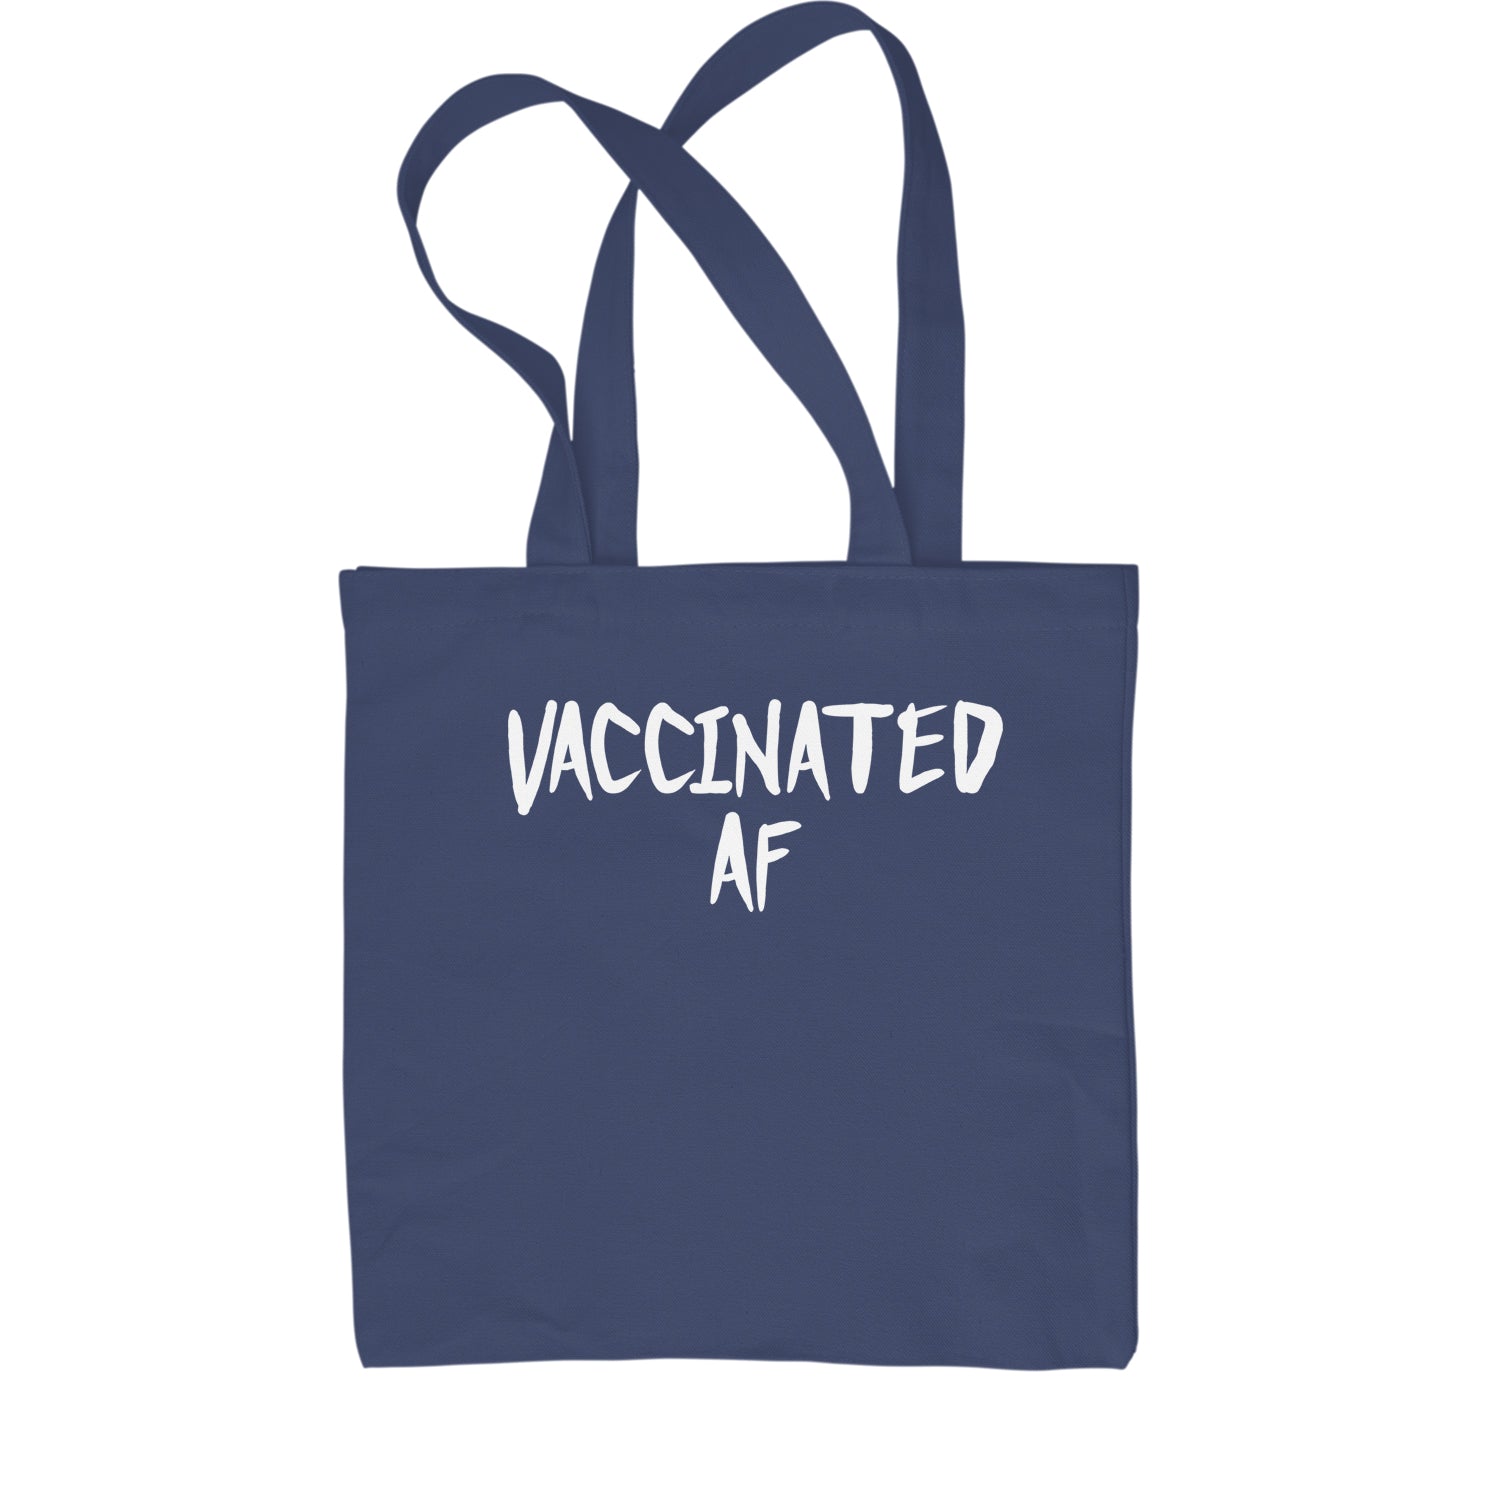 Vaccinated AF Pro Vaccine Funny Vaccination Health Shopping Tote Bag moderna, pfizer, vaccine, vax, vaxx by Expression Tees